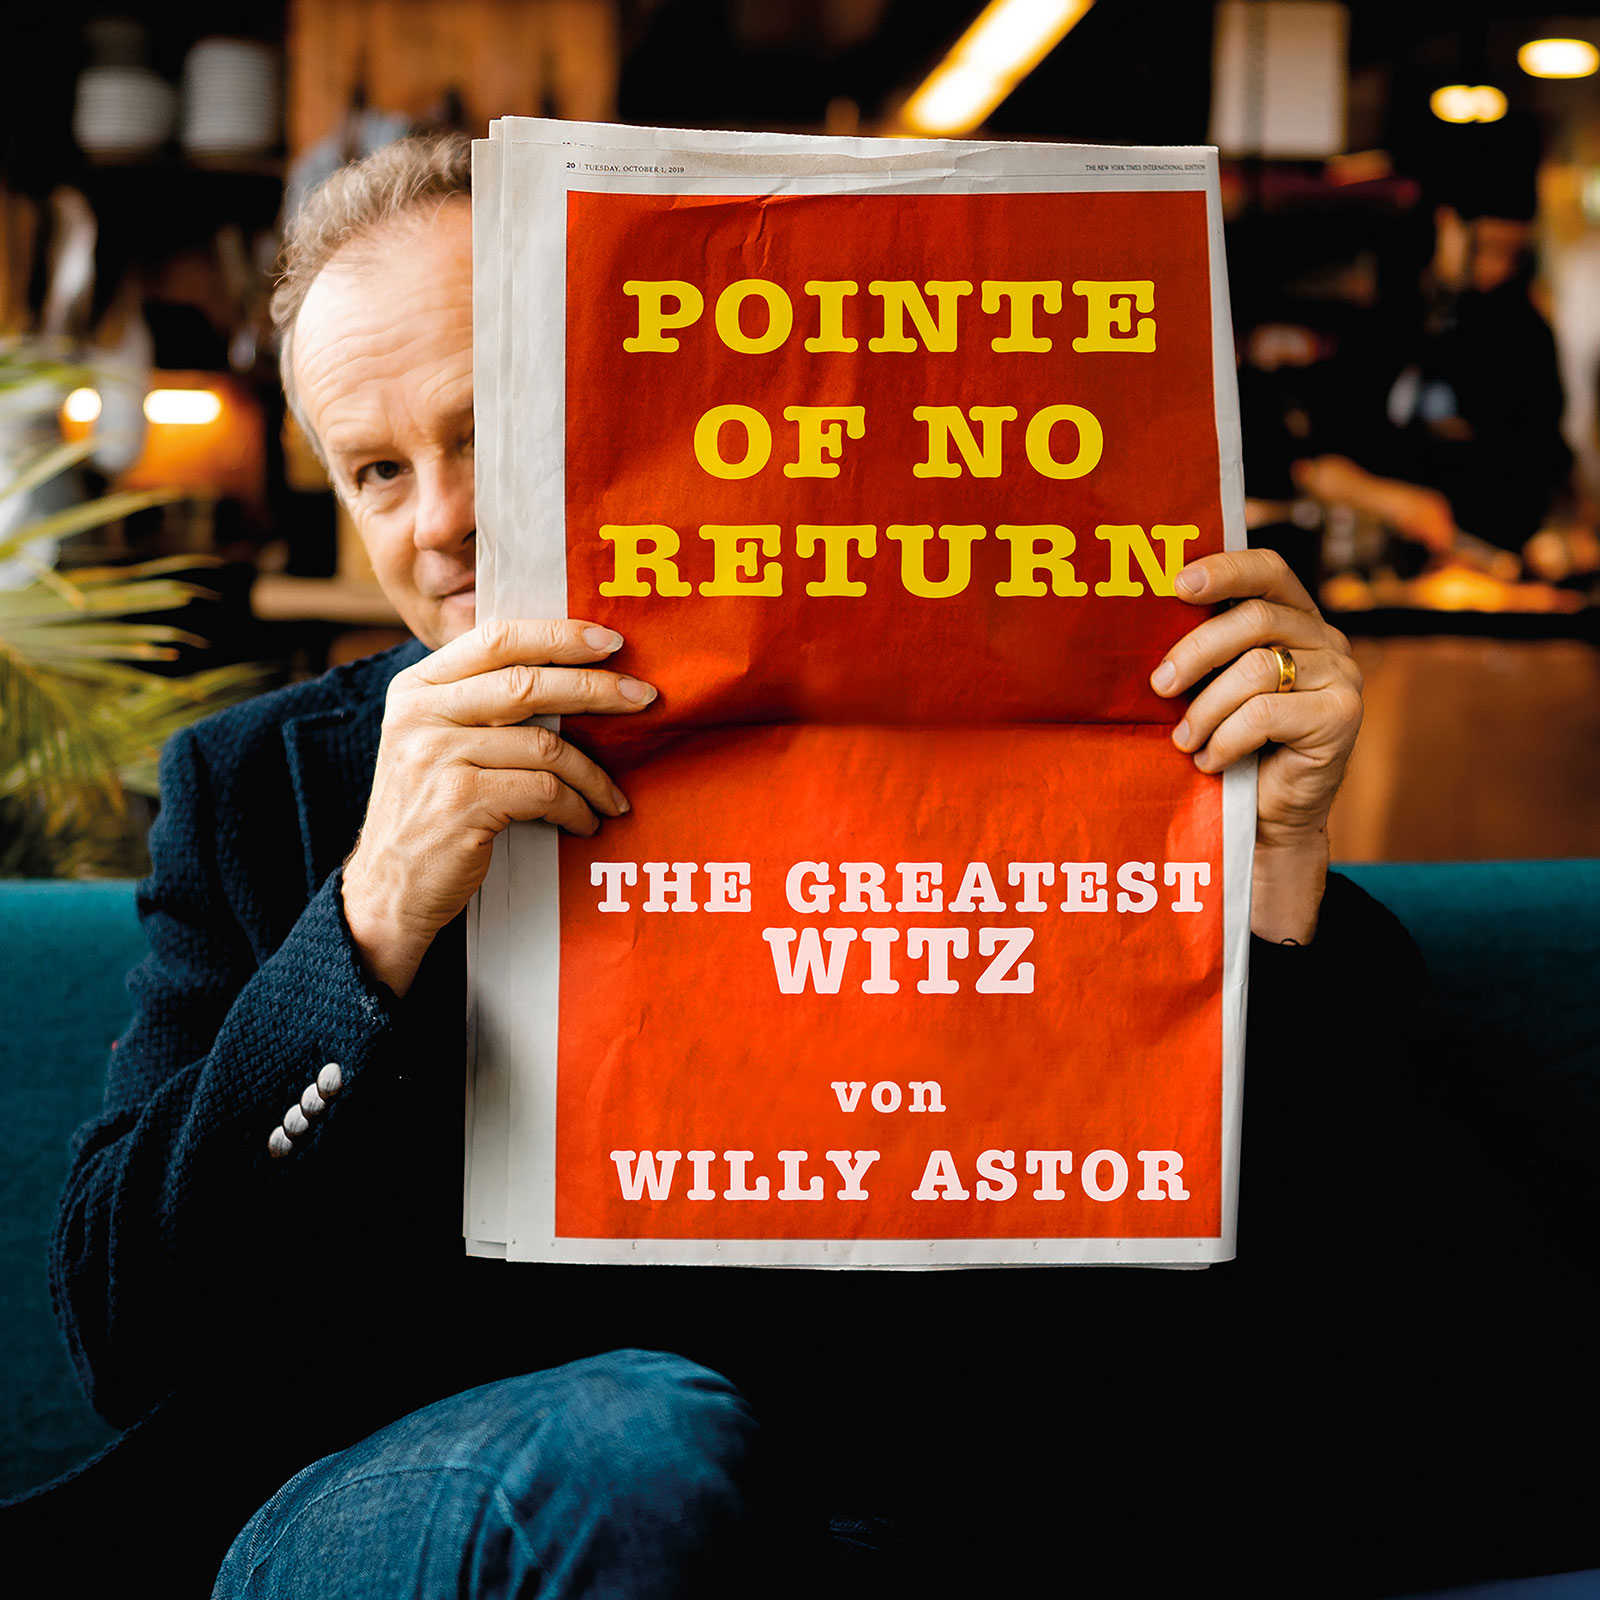 Willy Astor - Pointe of no Return, the Greatest Witz of Willy